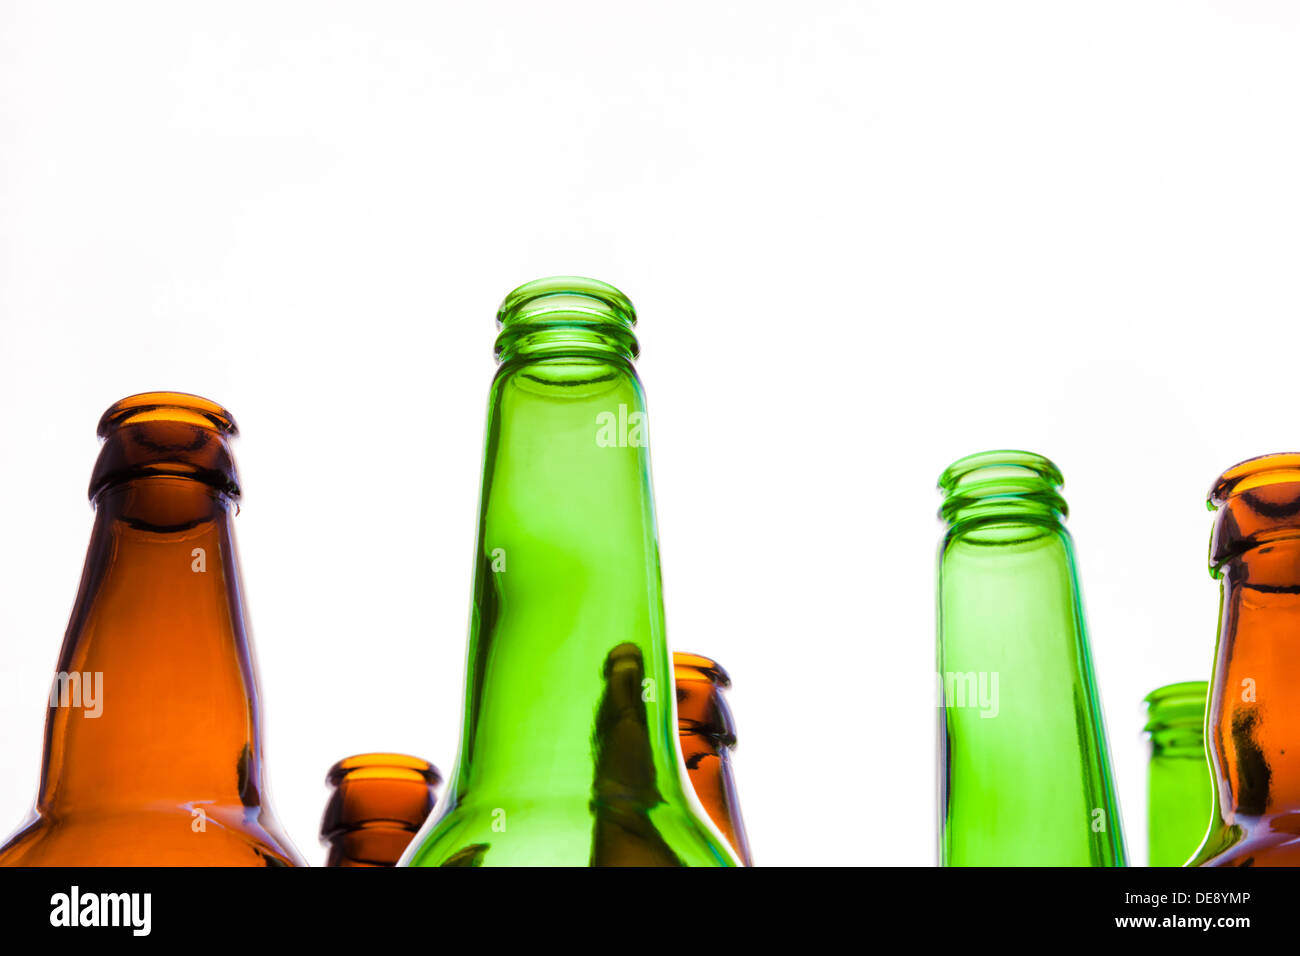 Looking up at the necks of empty beer bottles isolated on a white background. Stock Photo